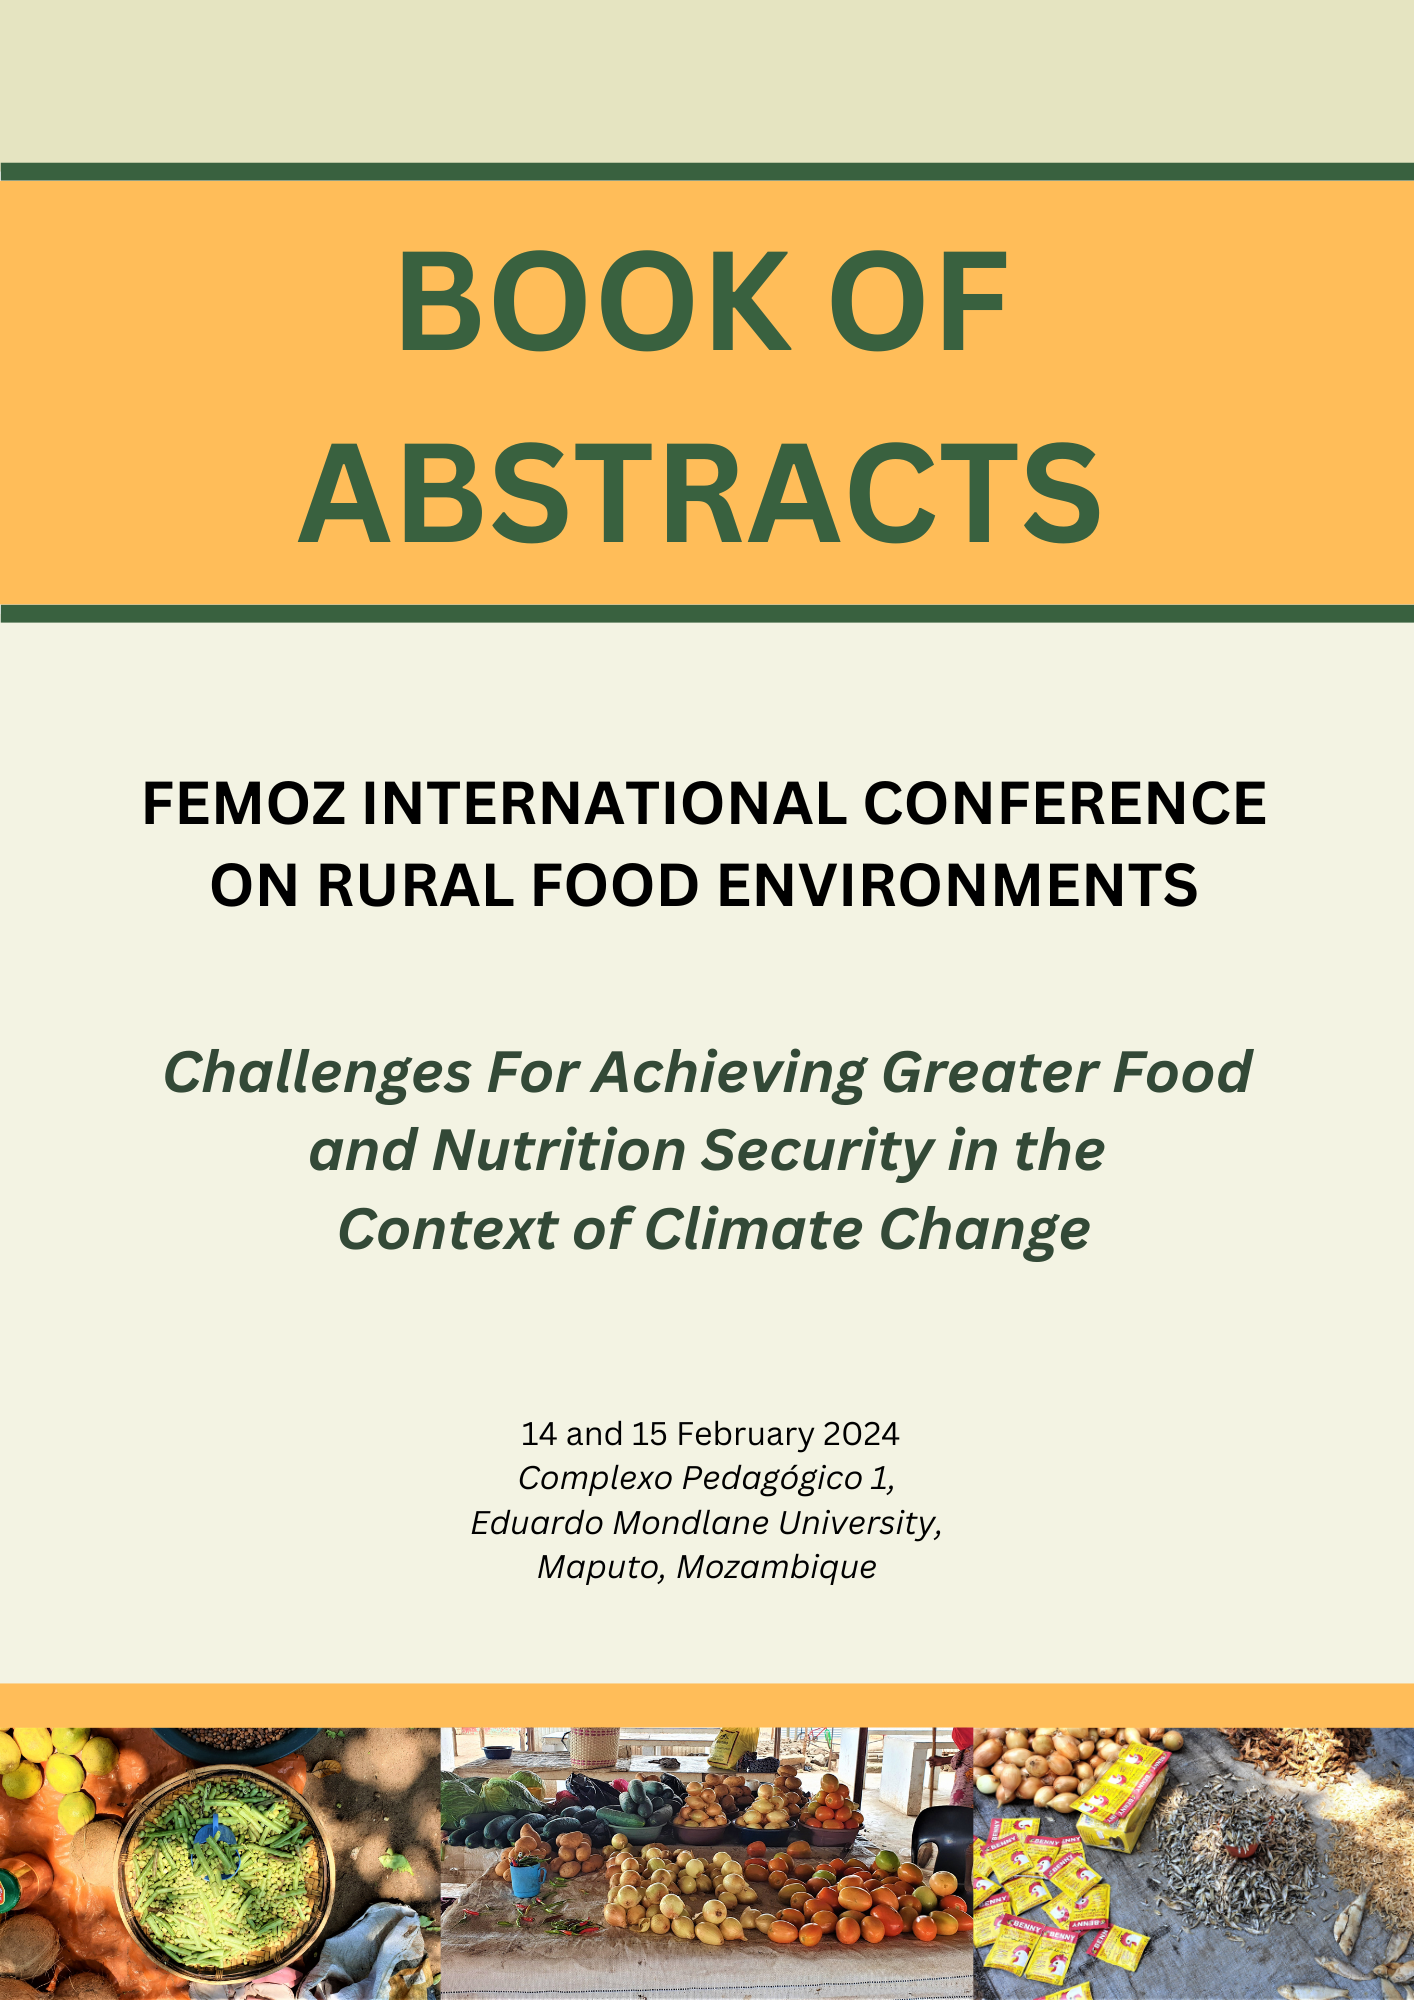 BOOK OF ABSRACTS FEMOZ International Conference on Rural Food Environments 2024